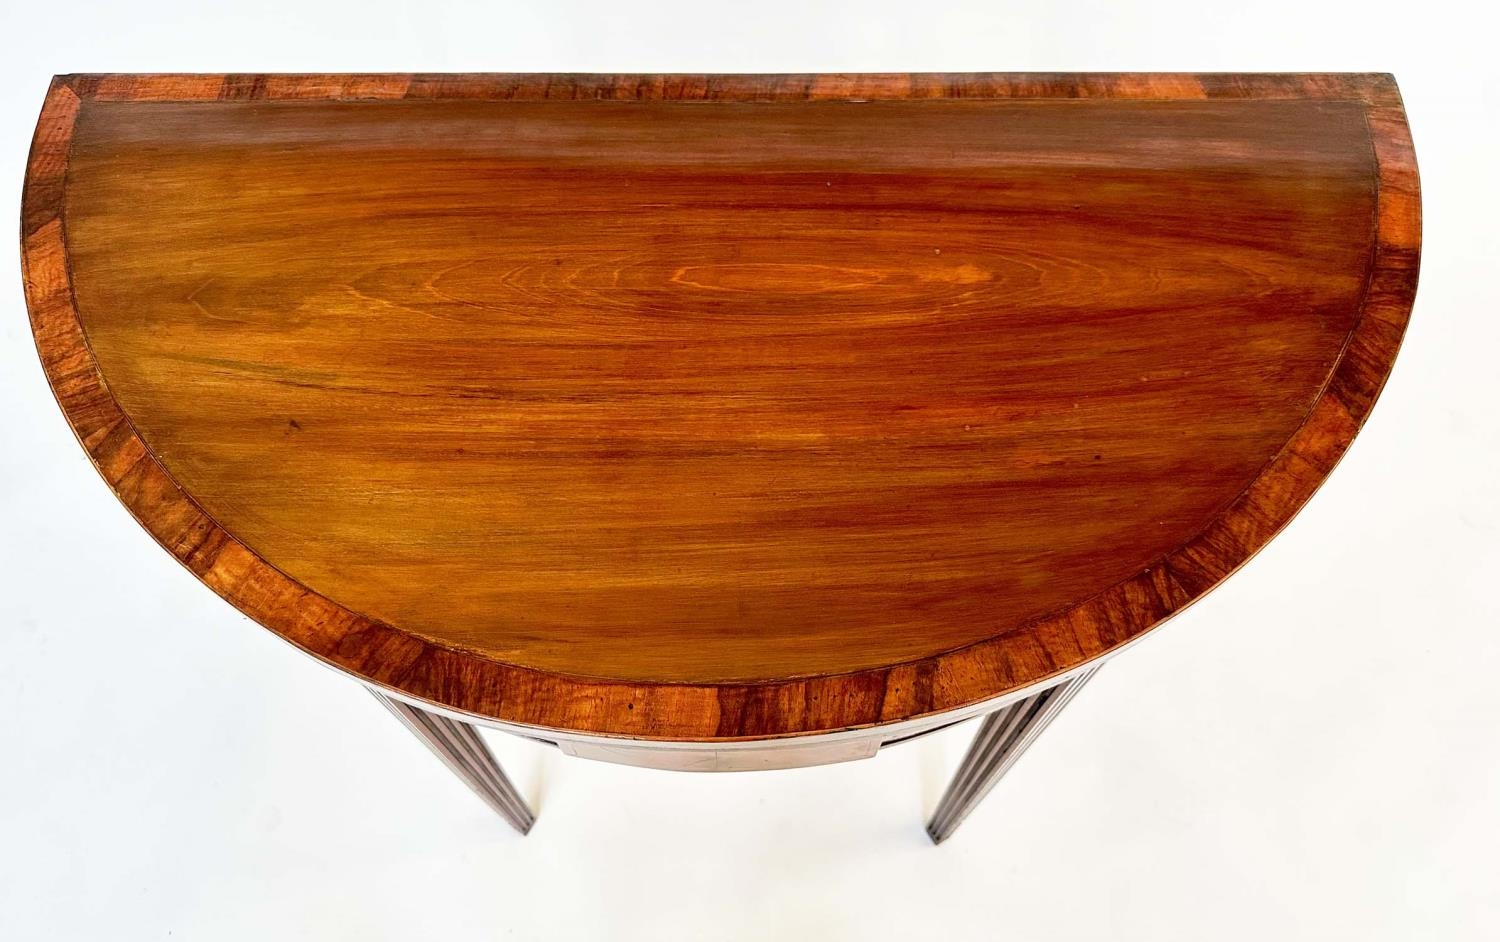 TEA TABLE, George III period flame mahogany and tulipwood crossbanded demilune foldover with - Image 5 of 8